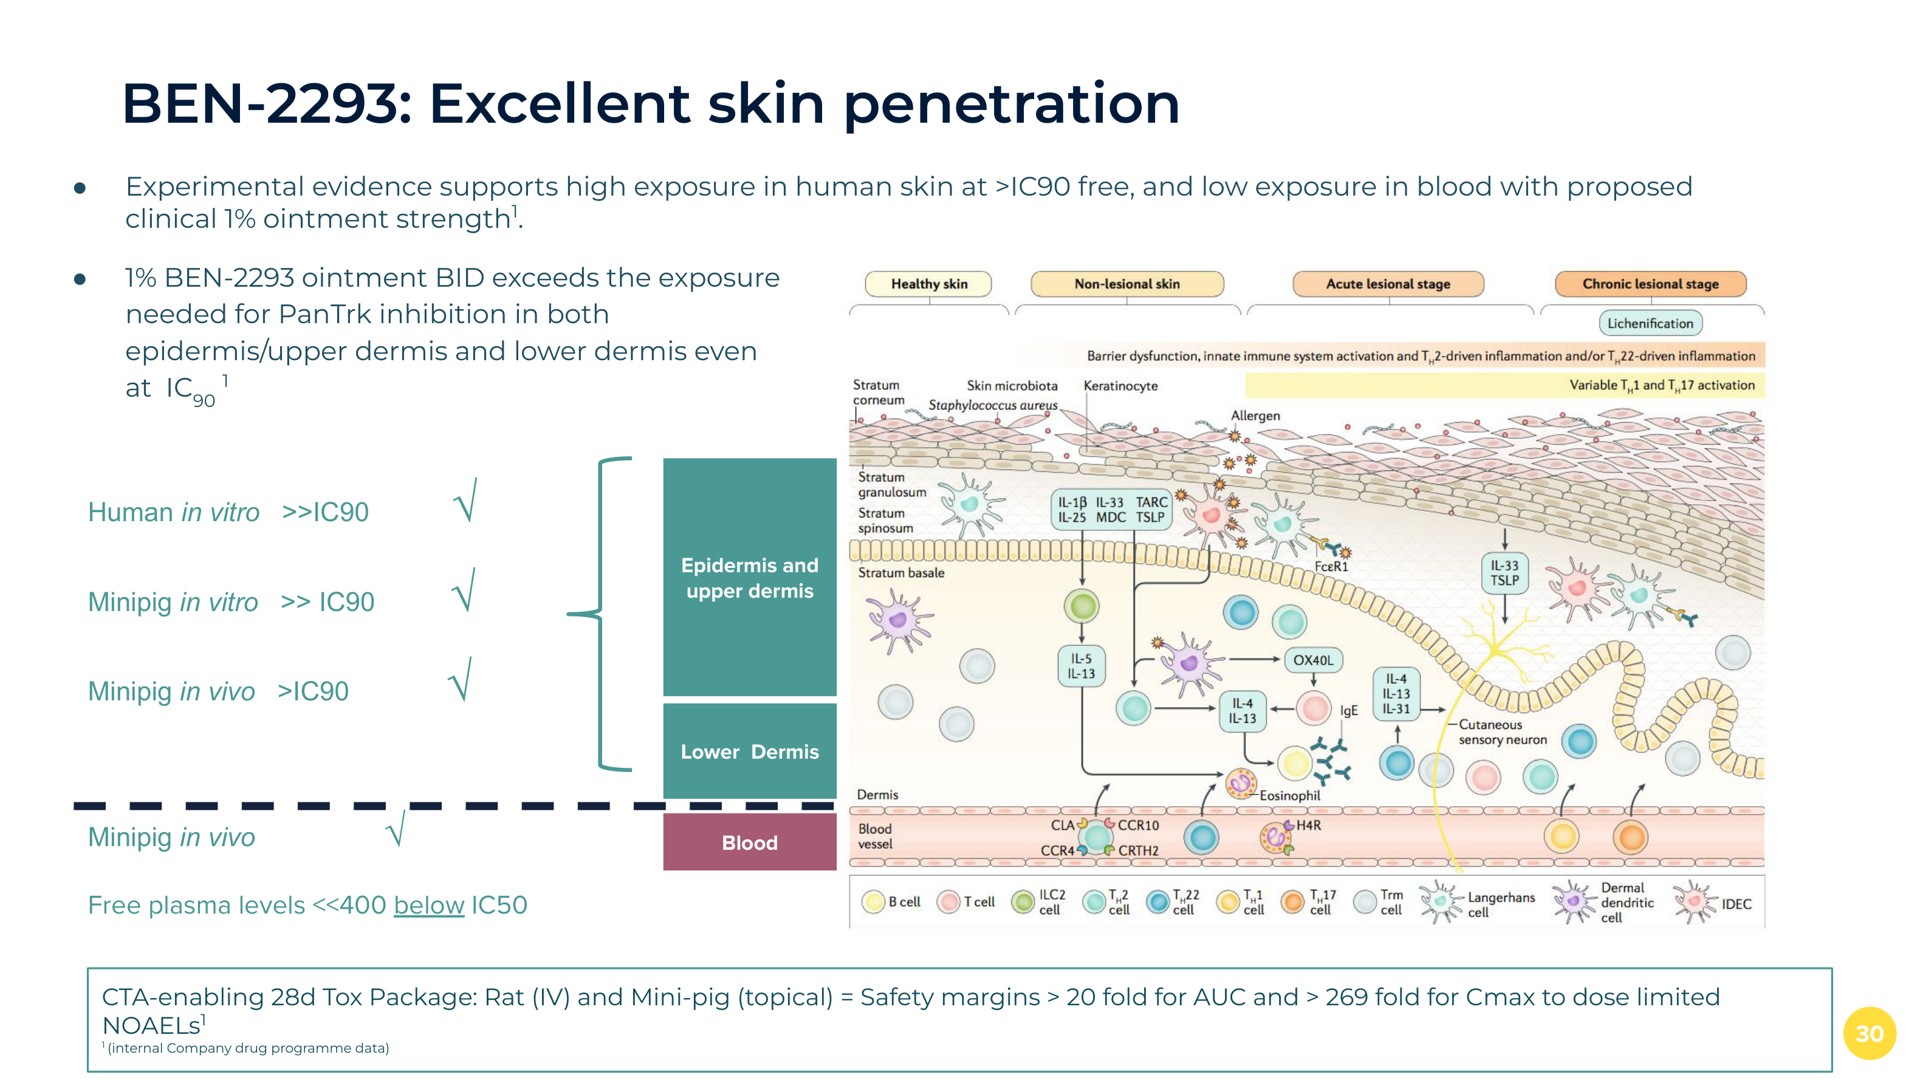 ben excellent skin penetration experimental evidence supports high exposure in human skin at free and low exposure in blood with proposed clinical ointment strength ben ointment bid exceeds the exposure needed for inhibition in both epidermis upper dermis and lower dermis even at human in in in in free plasma levels below enabling tox package rat and pig topical safety margins fold for and fold for to dose limited a | BenevolentAI